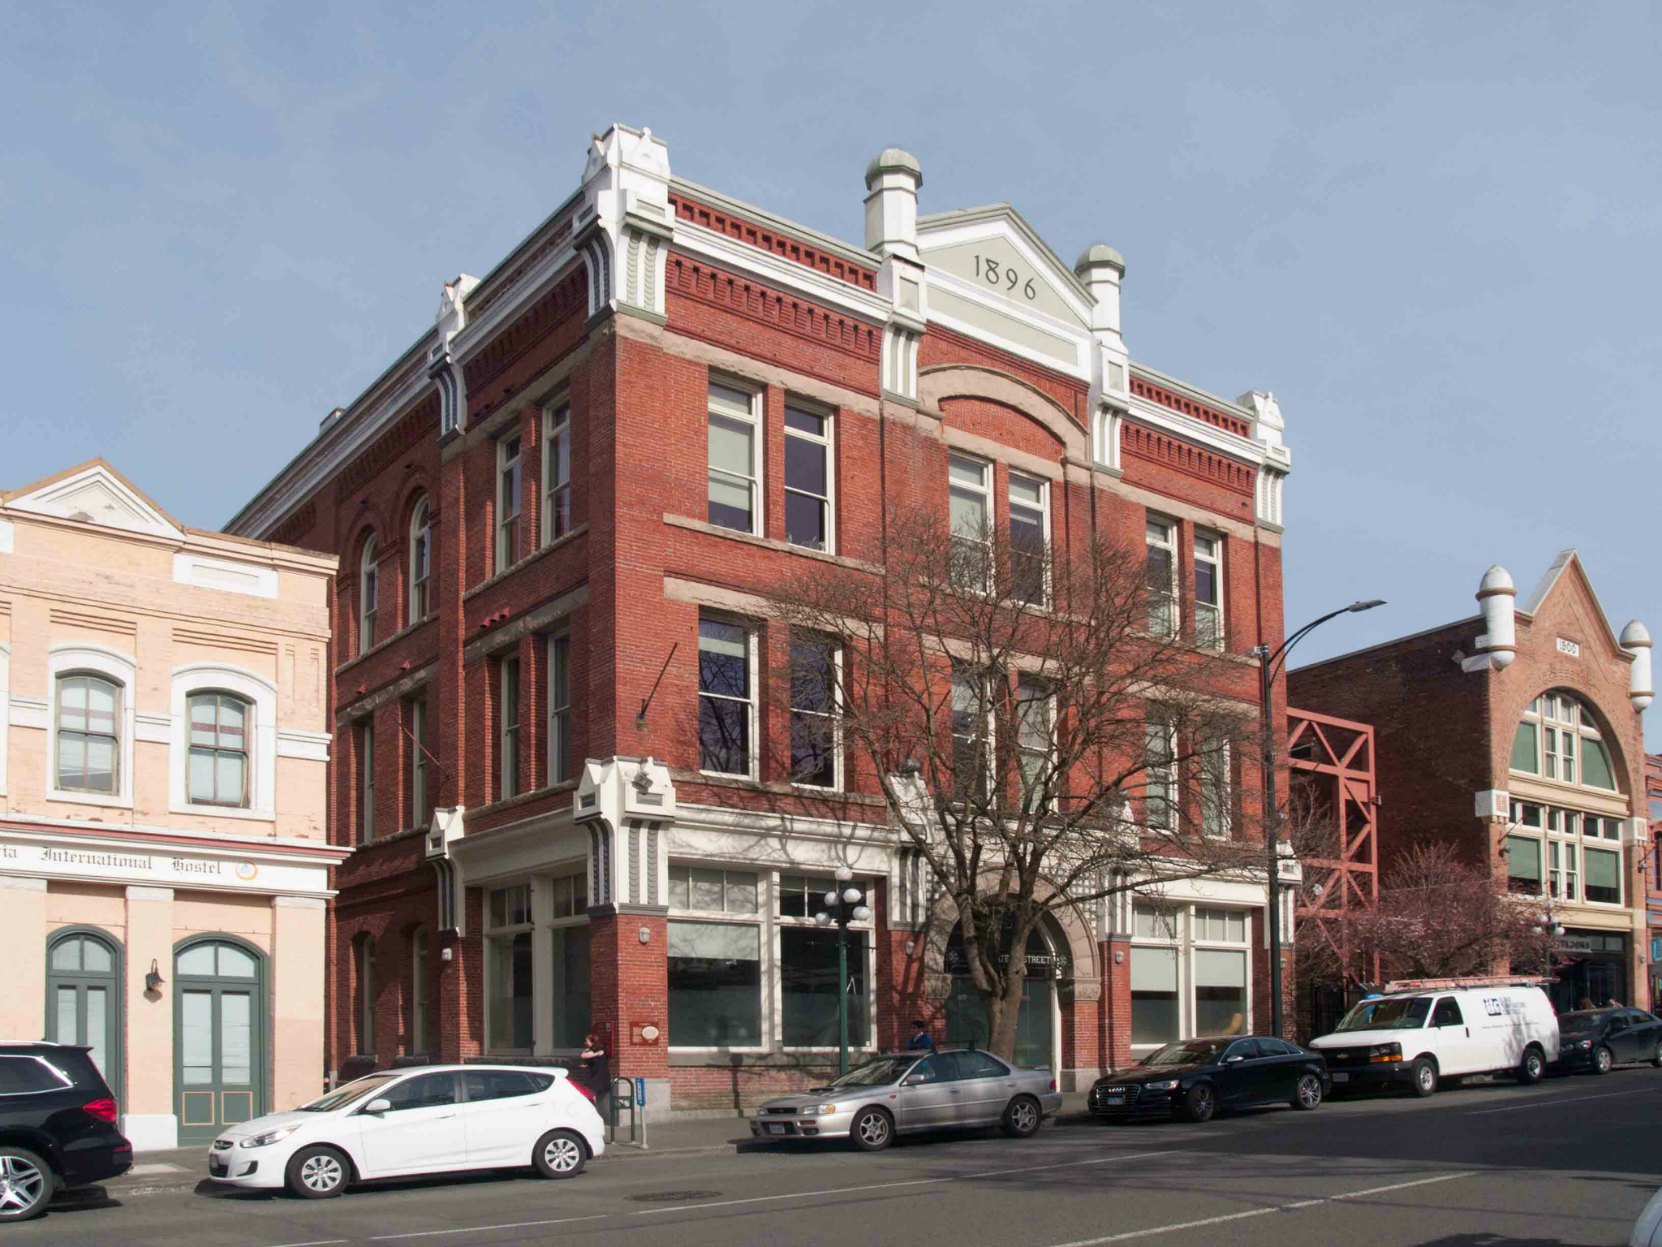 The Leisier Building at 524 Yates Street, built as a warehouse for Simon Leiser in 1896